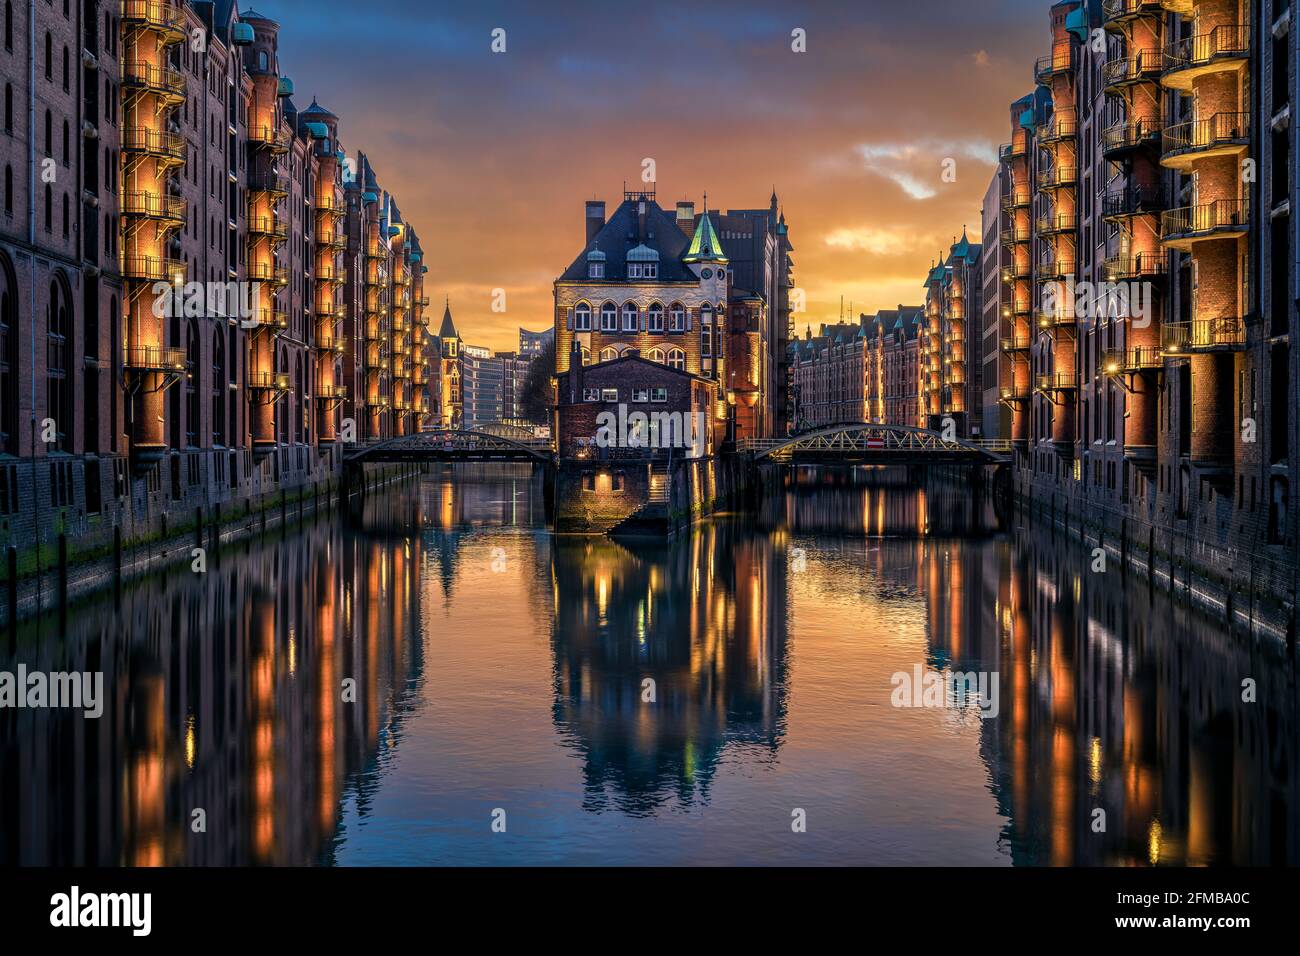 Sunset at the famous Wasserschloss (water castle) building in the historic Speicherstadt in Hamburg, Germany Stock Photo